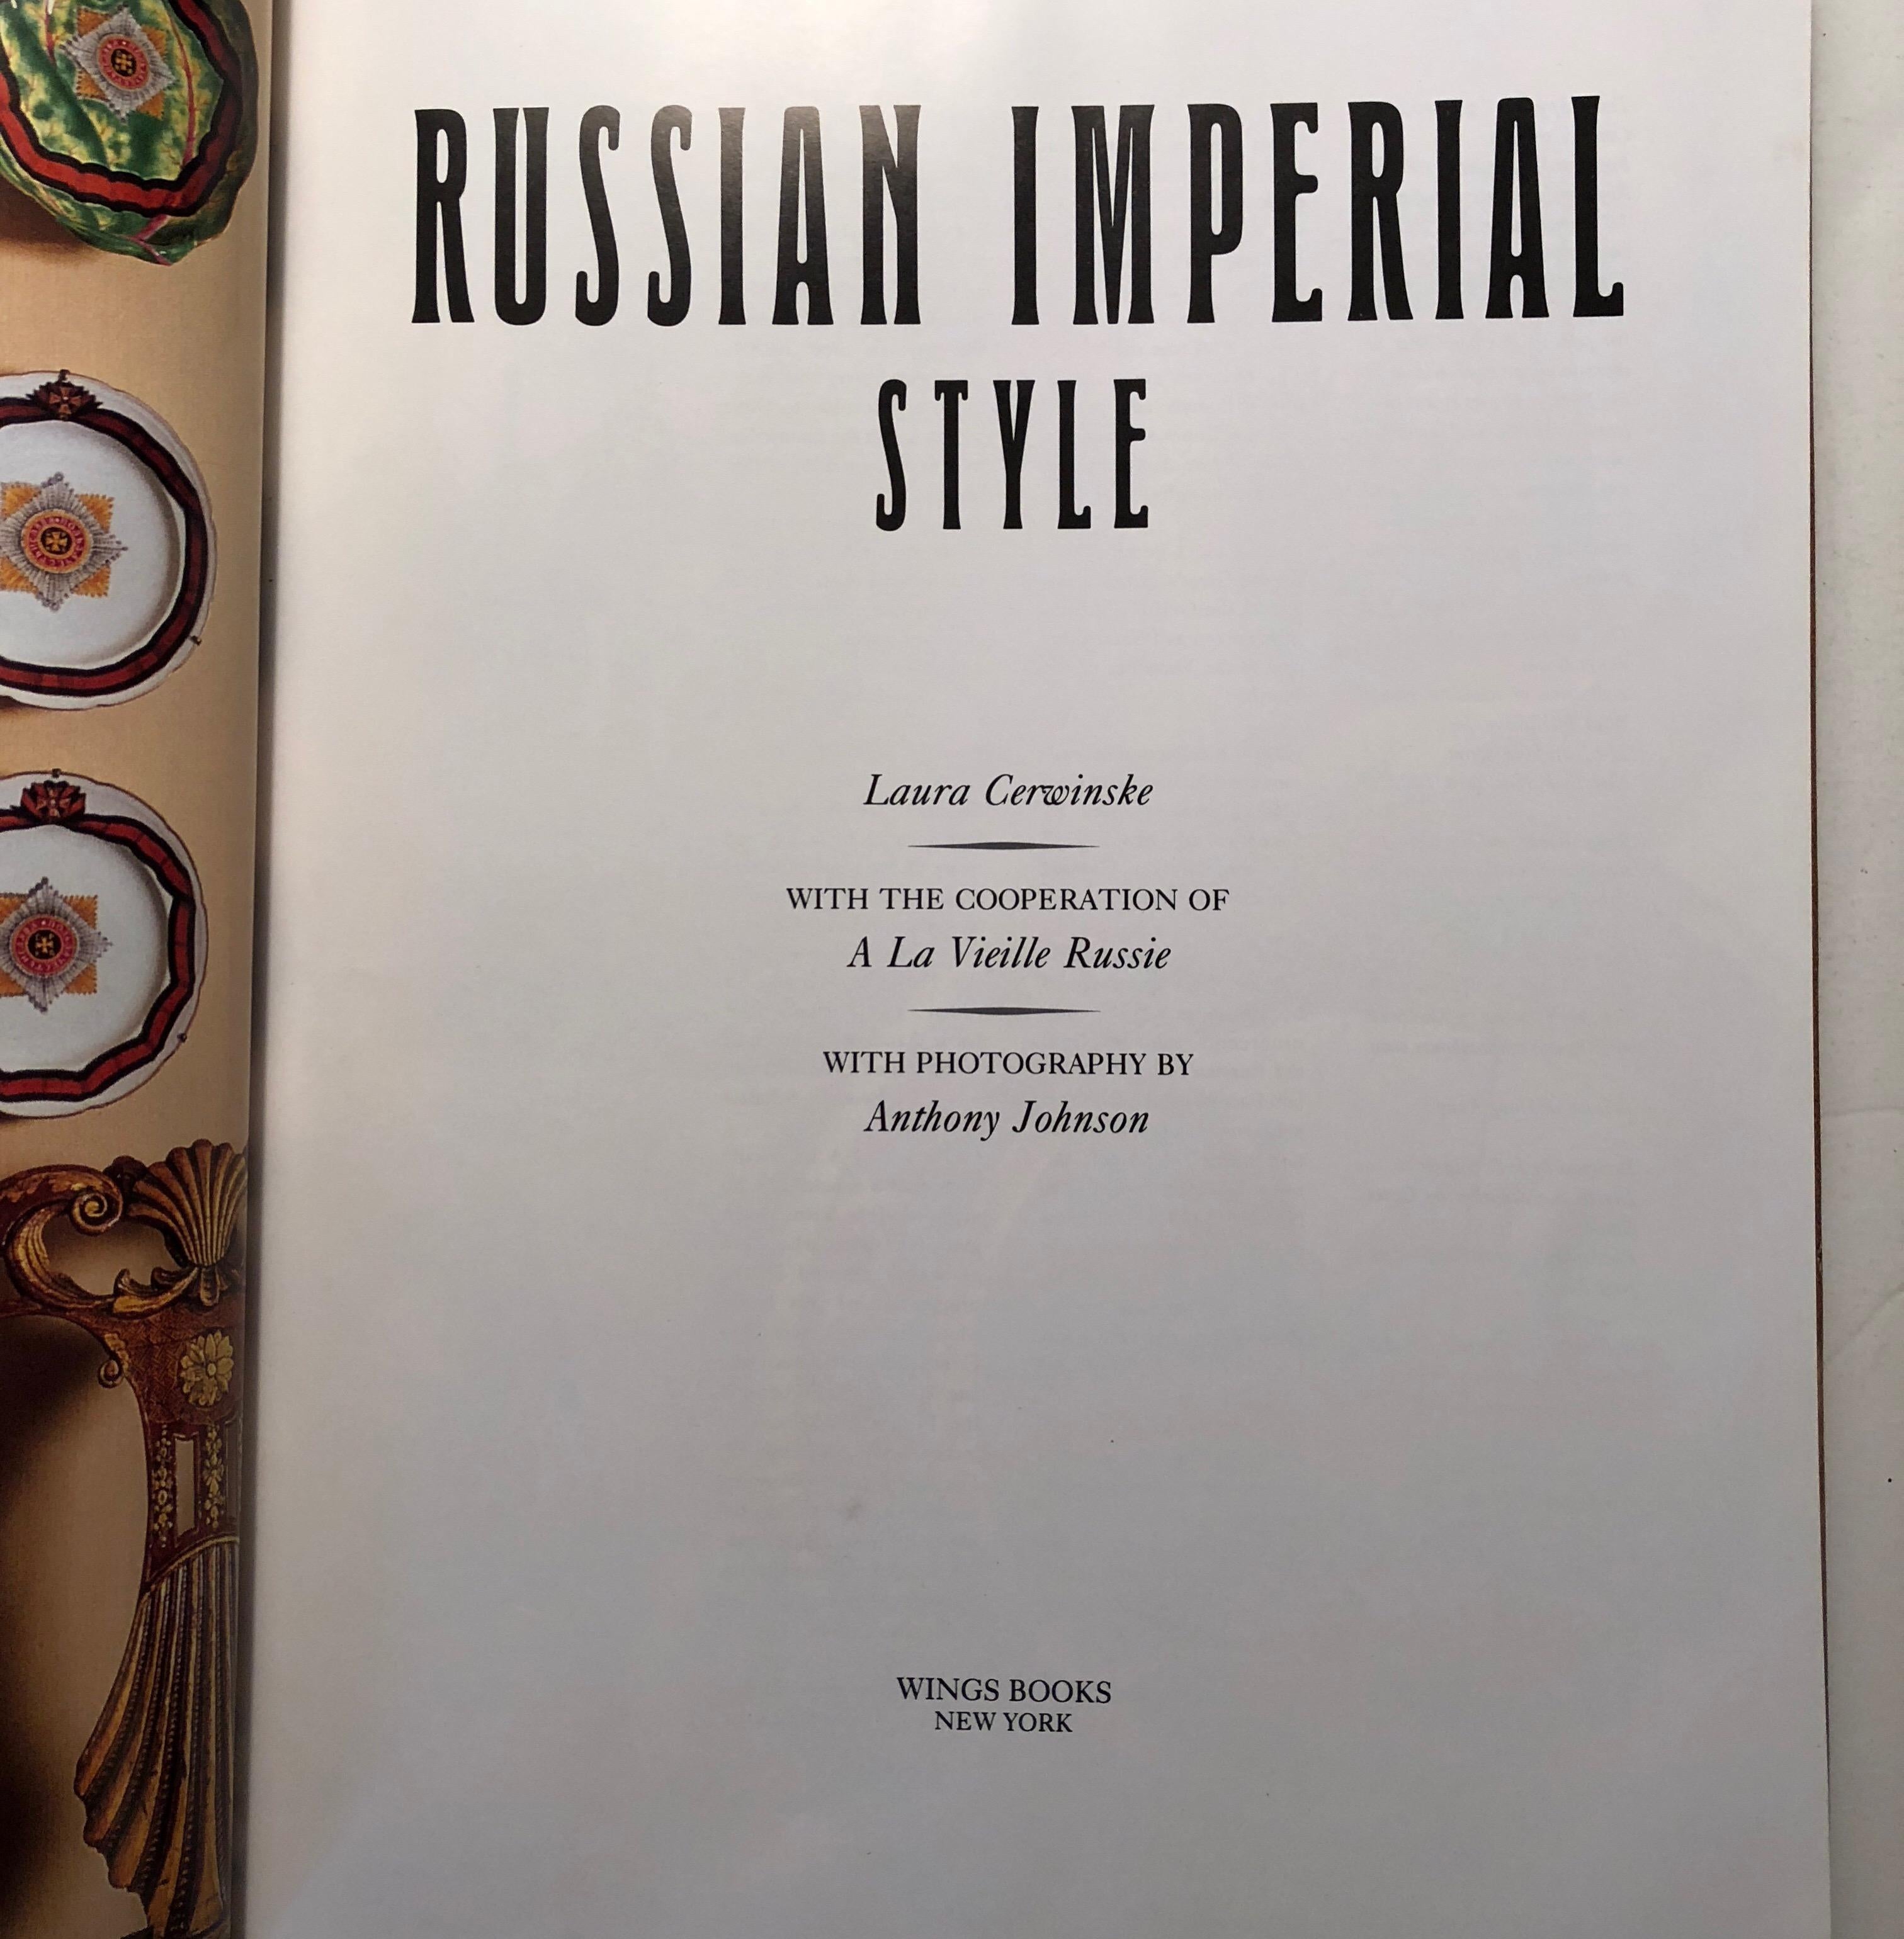 With over 100 gorgeous photographs this book originally published in 1990 displays the sumptuous lifestyle of the Russian Imperial family. The treasures created and collected by the aristocracy of the 18th and 19th centuries. Wonderful forward to